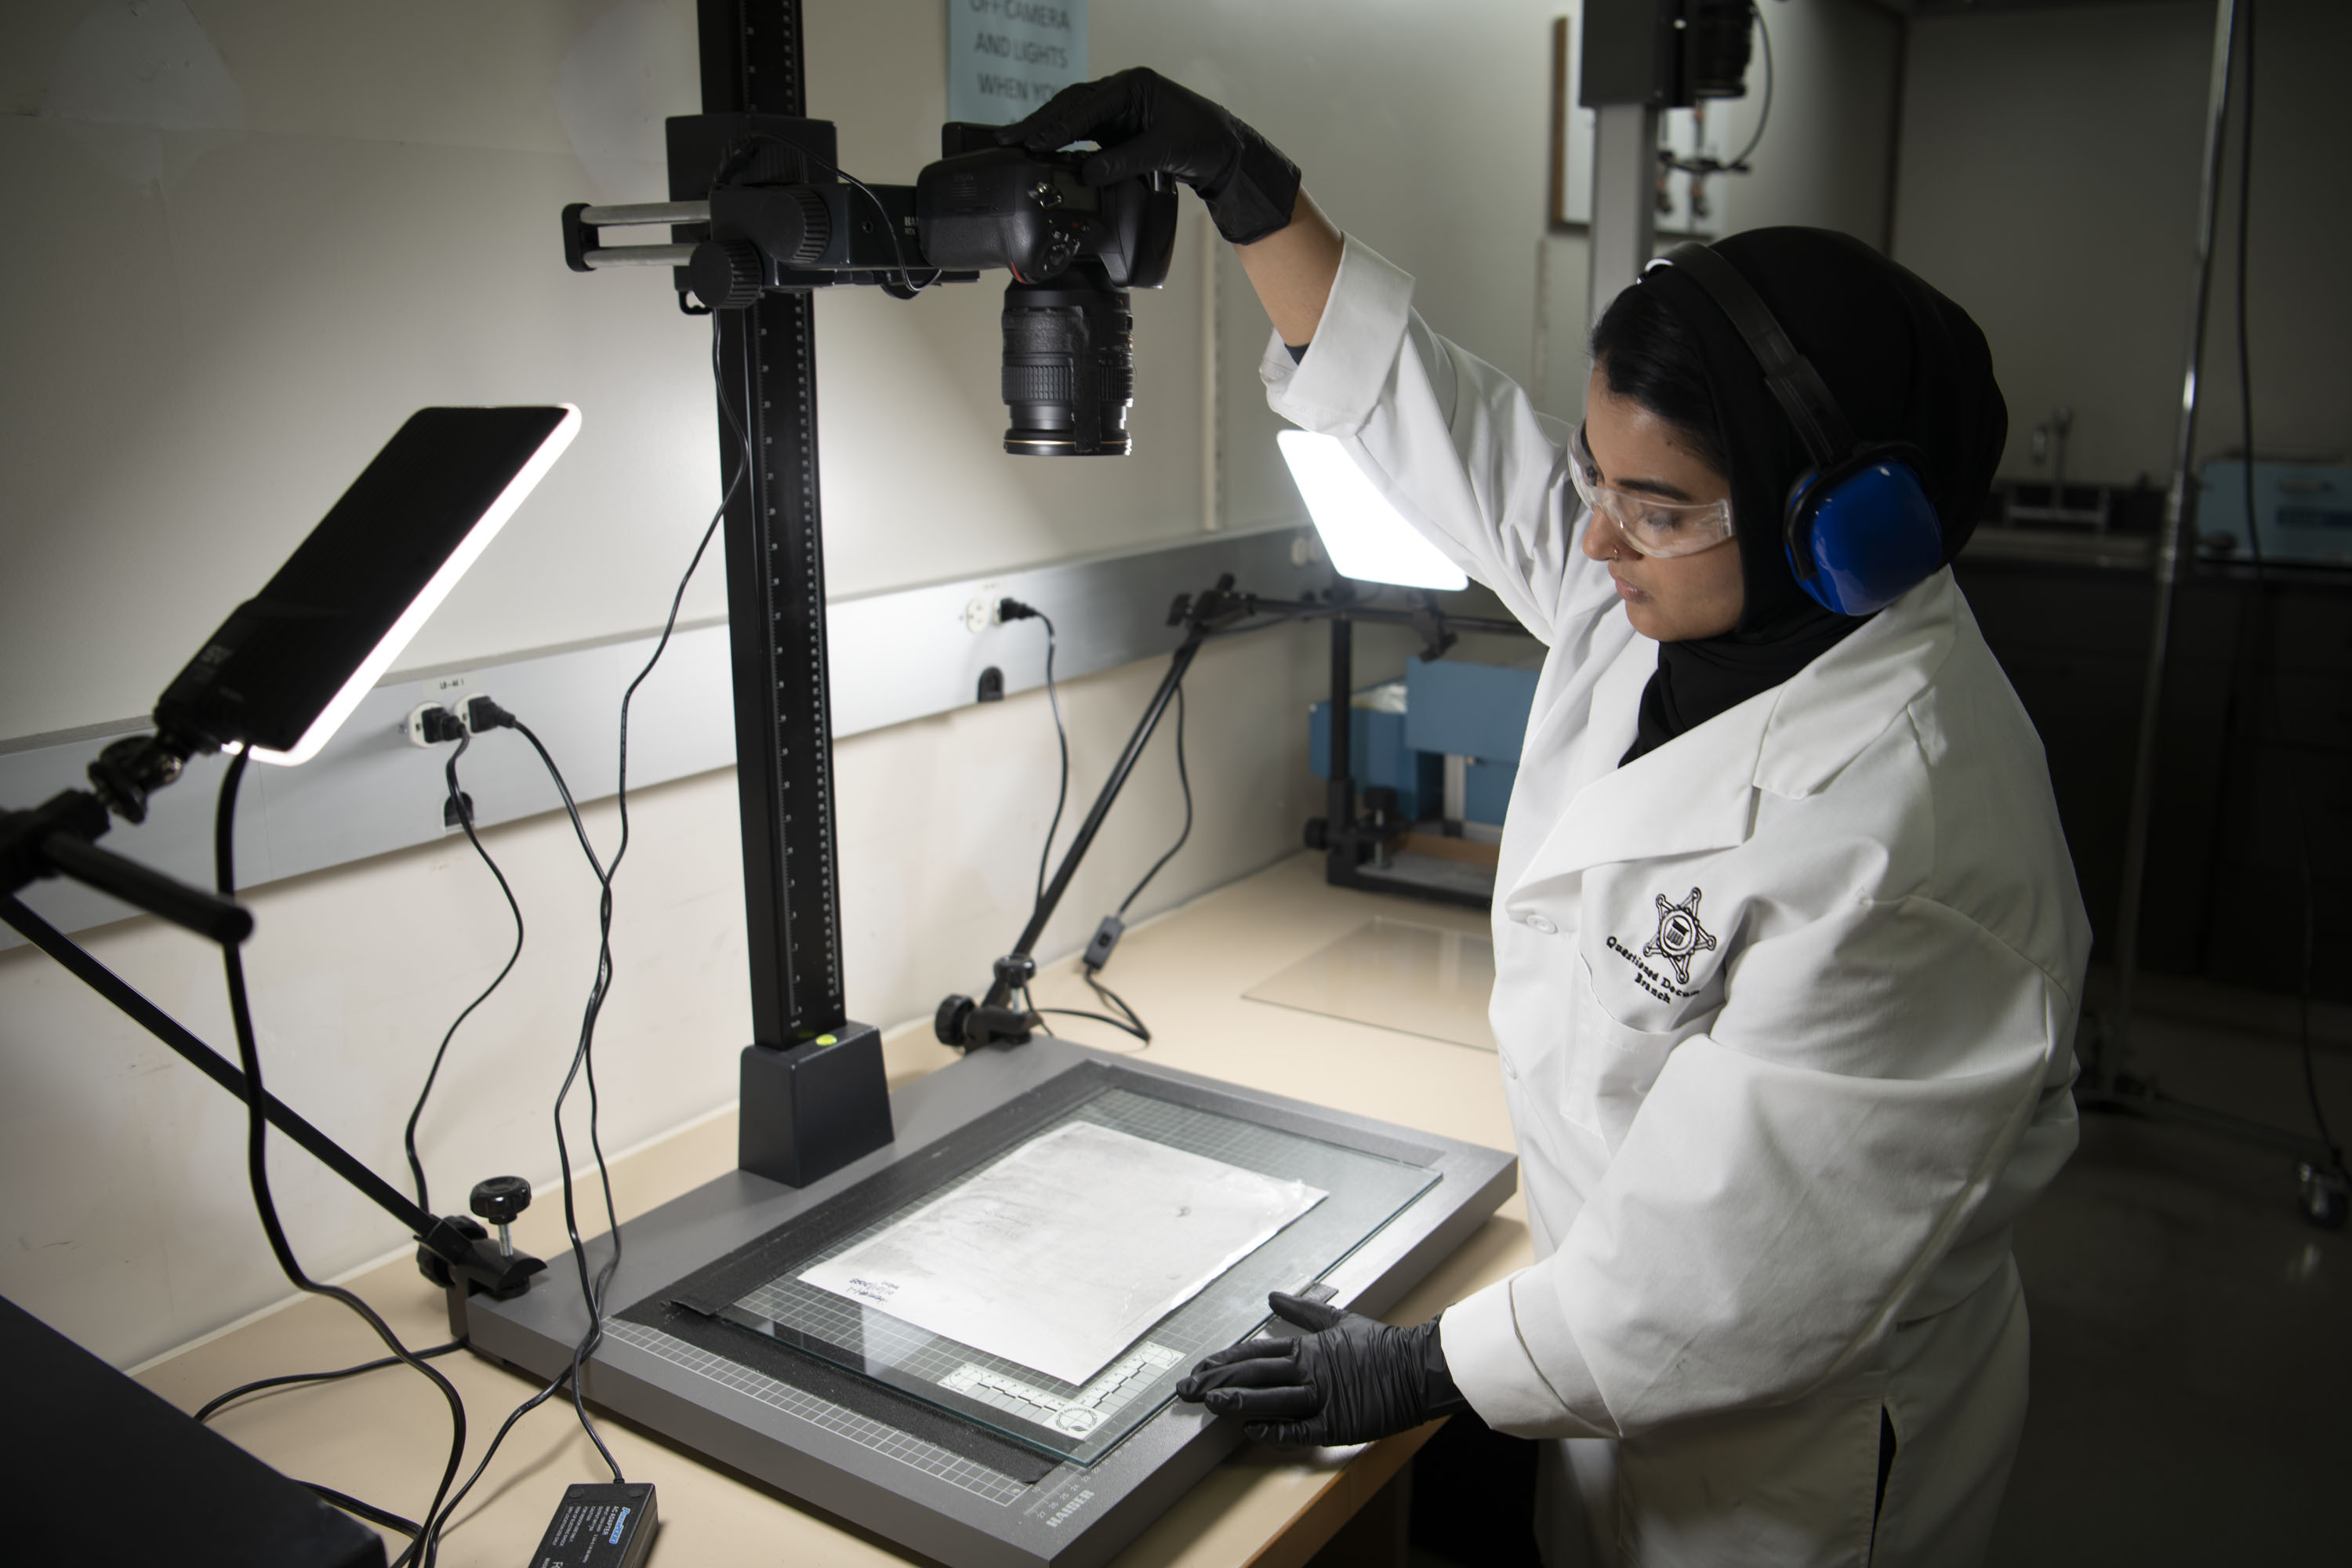 A lab specialist examines a document.